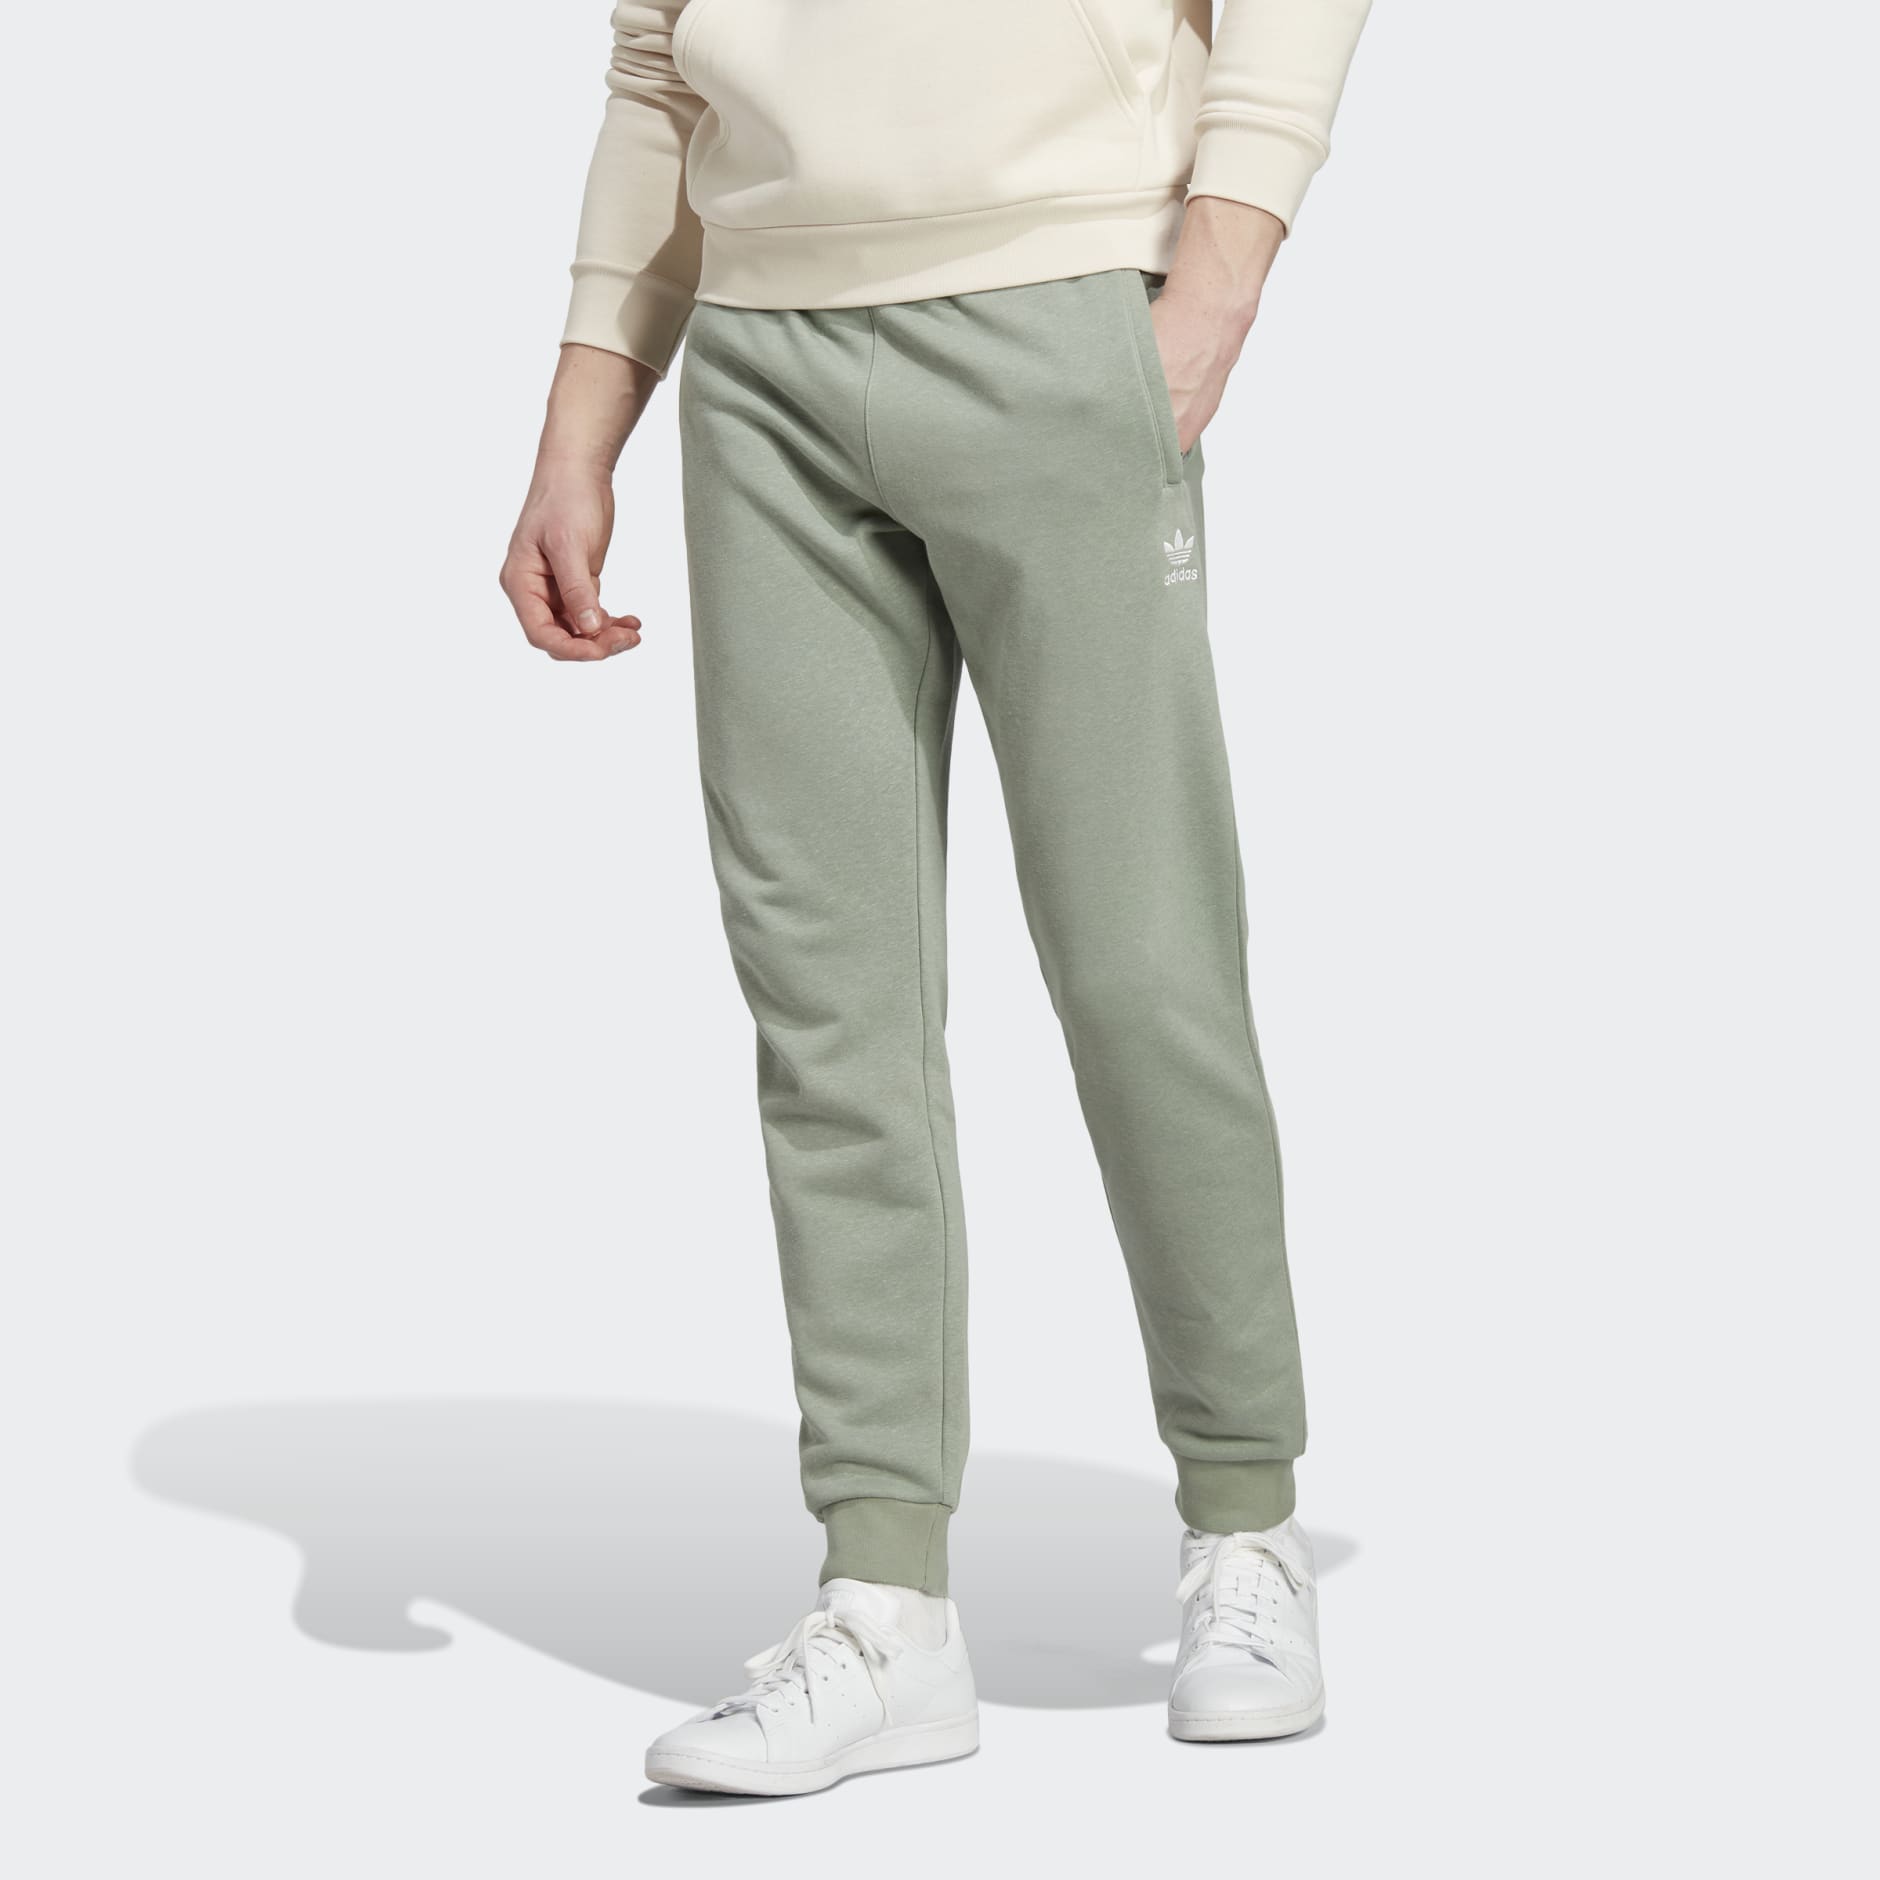 Men's Clothing - Essentials+ Made with Hemp Sweat Pants - Green | adidas  Egypt